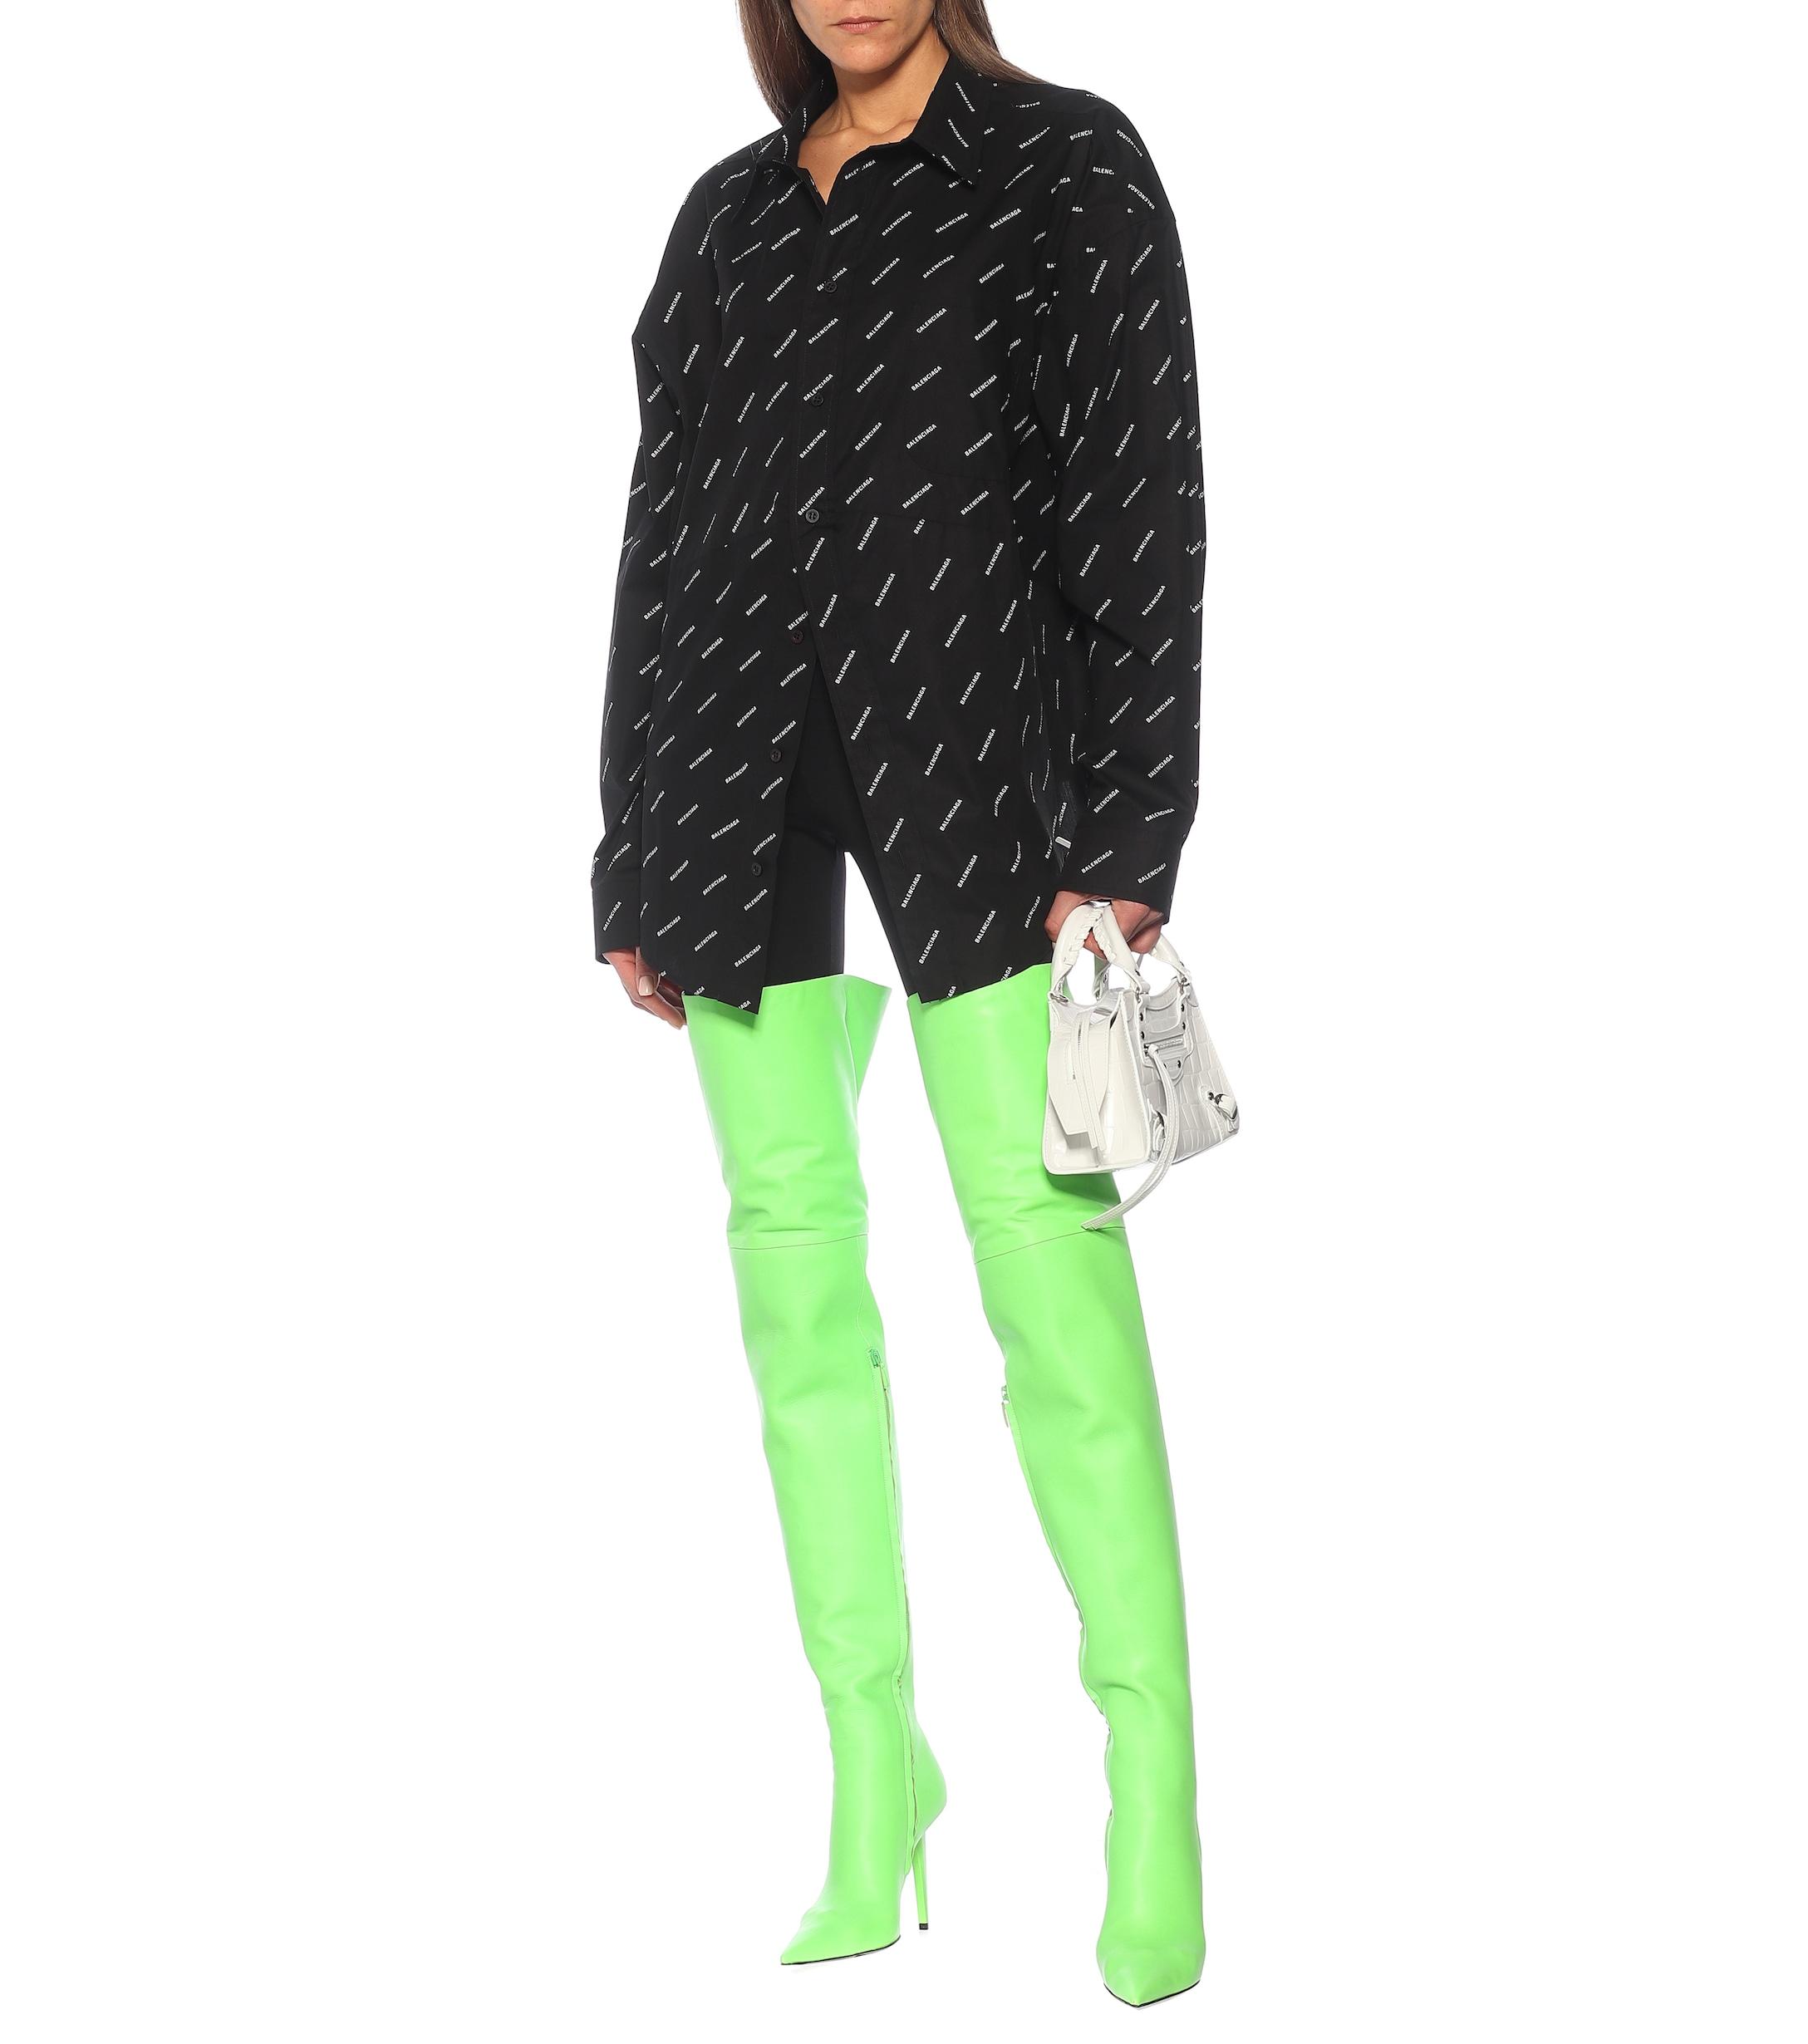 Balenciaga Knife Shark Over-the-knee Leather Boots in Green | Lyst